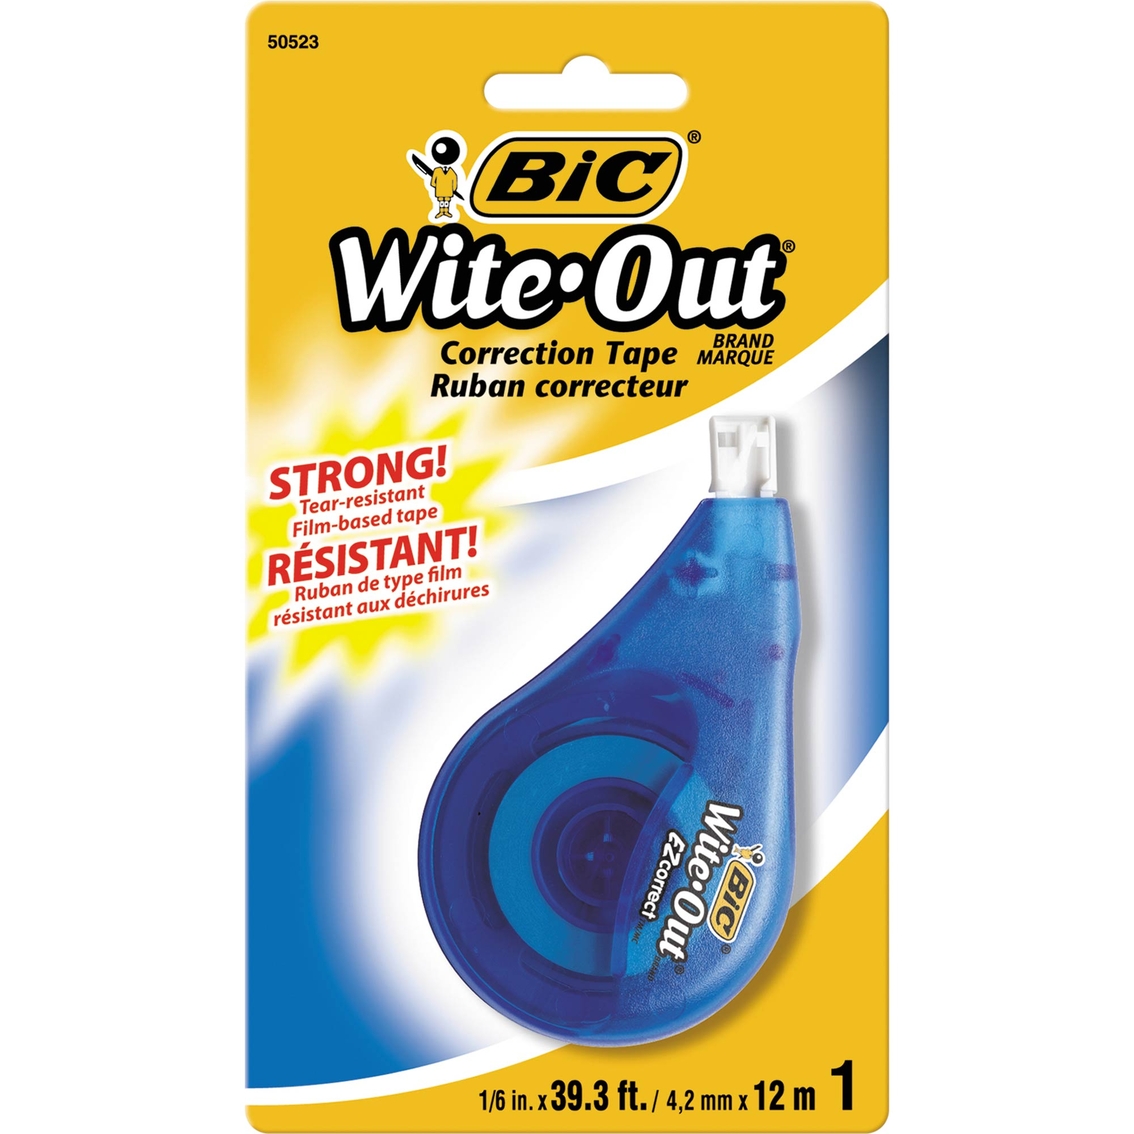 BIC White Out Correction Tape - Image 2 of 2